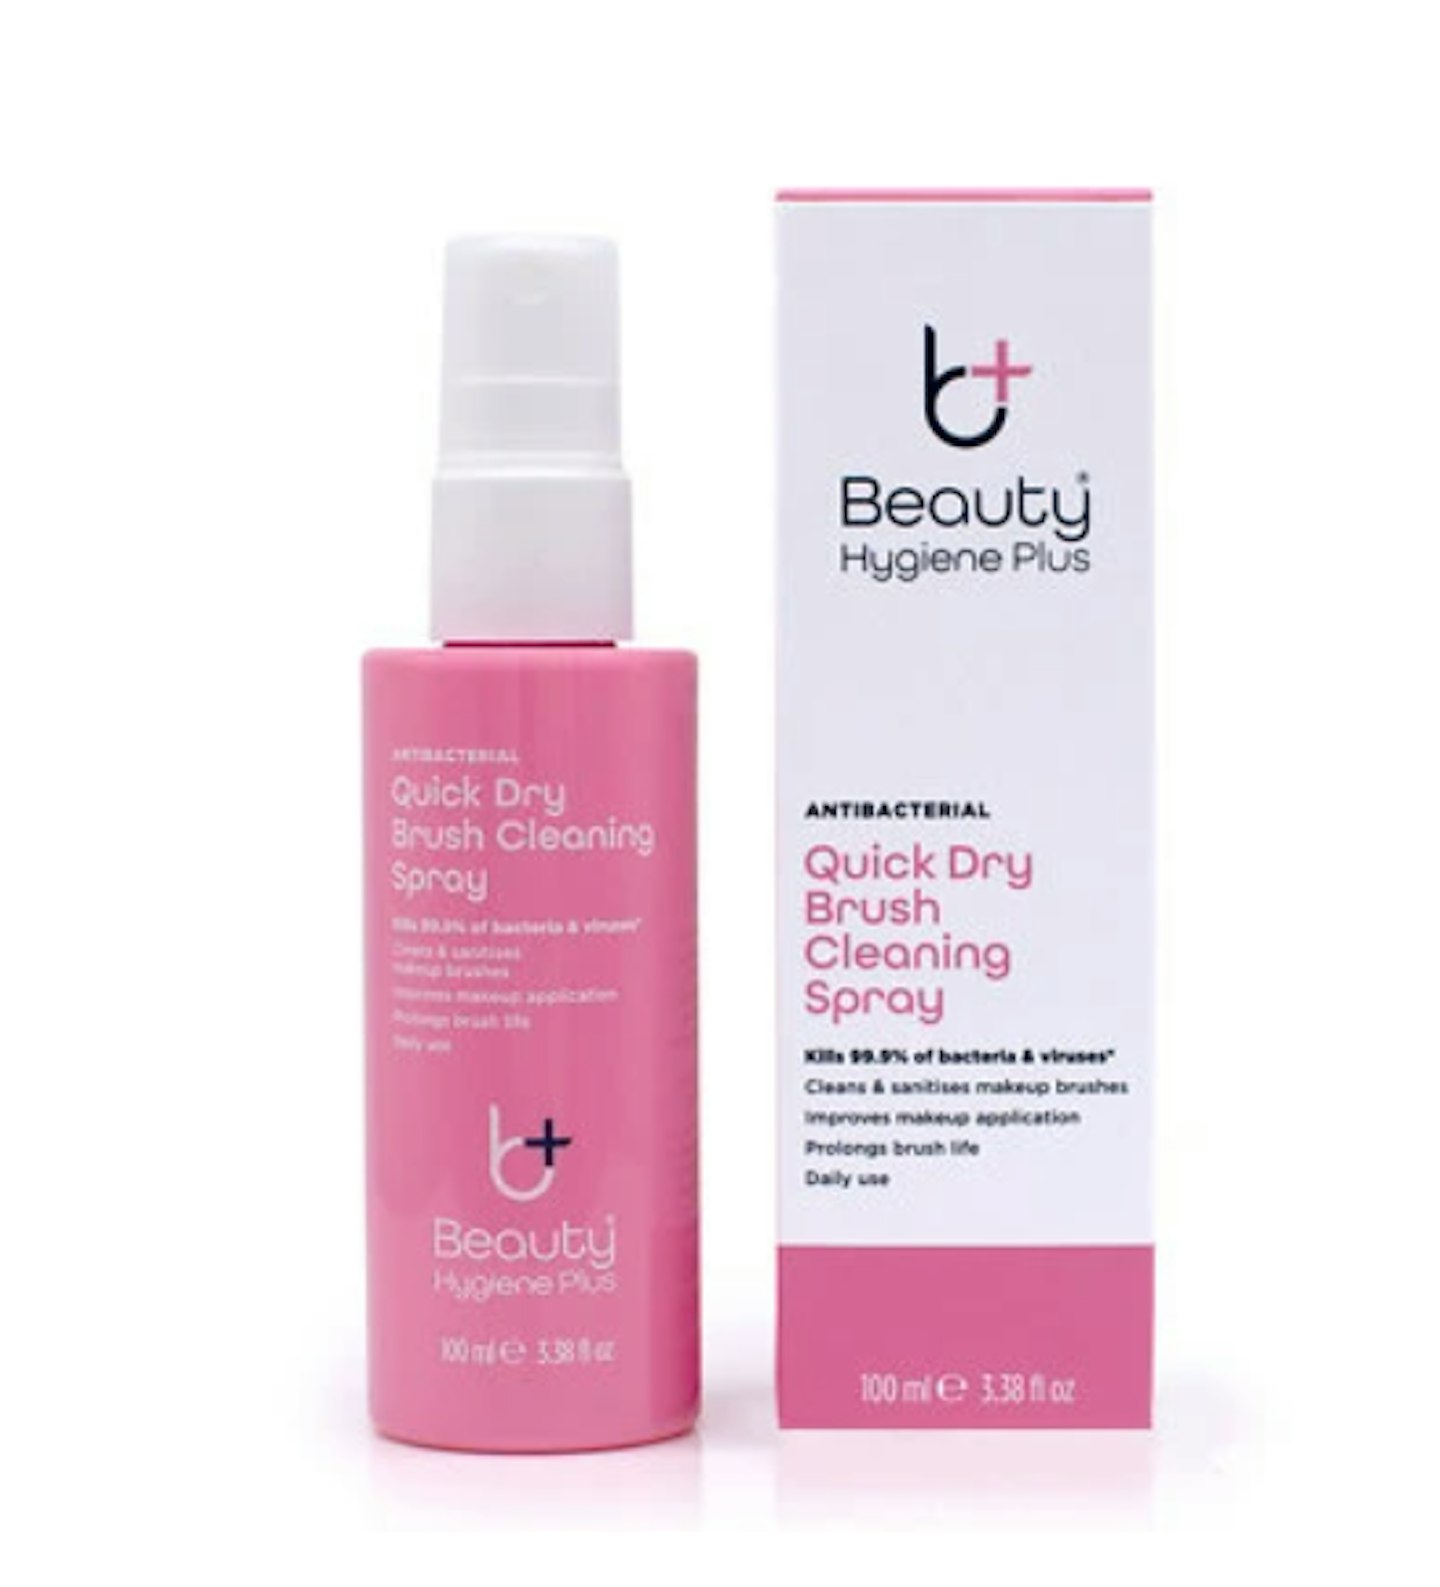 Beauty Hygiene Plus Quick Dry Brush Cleaning Spray